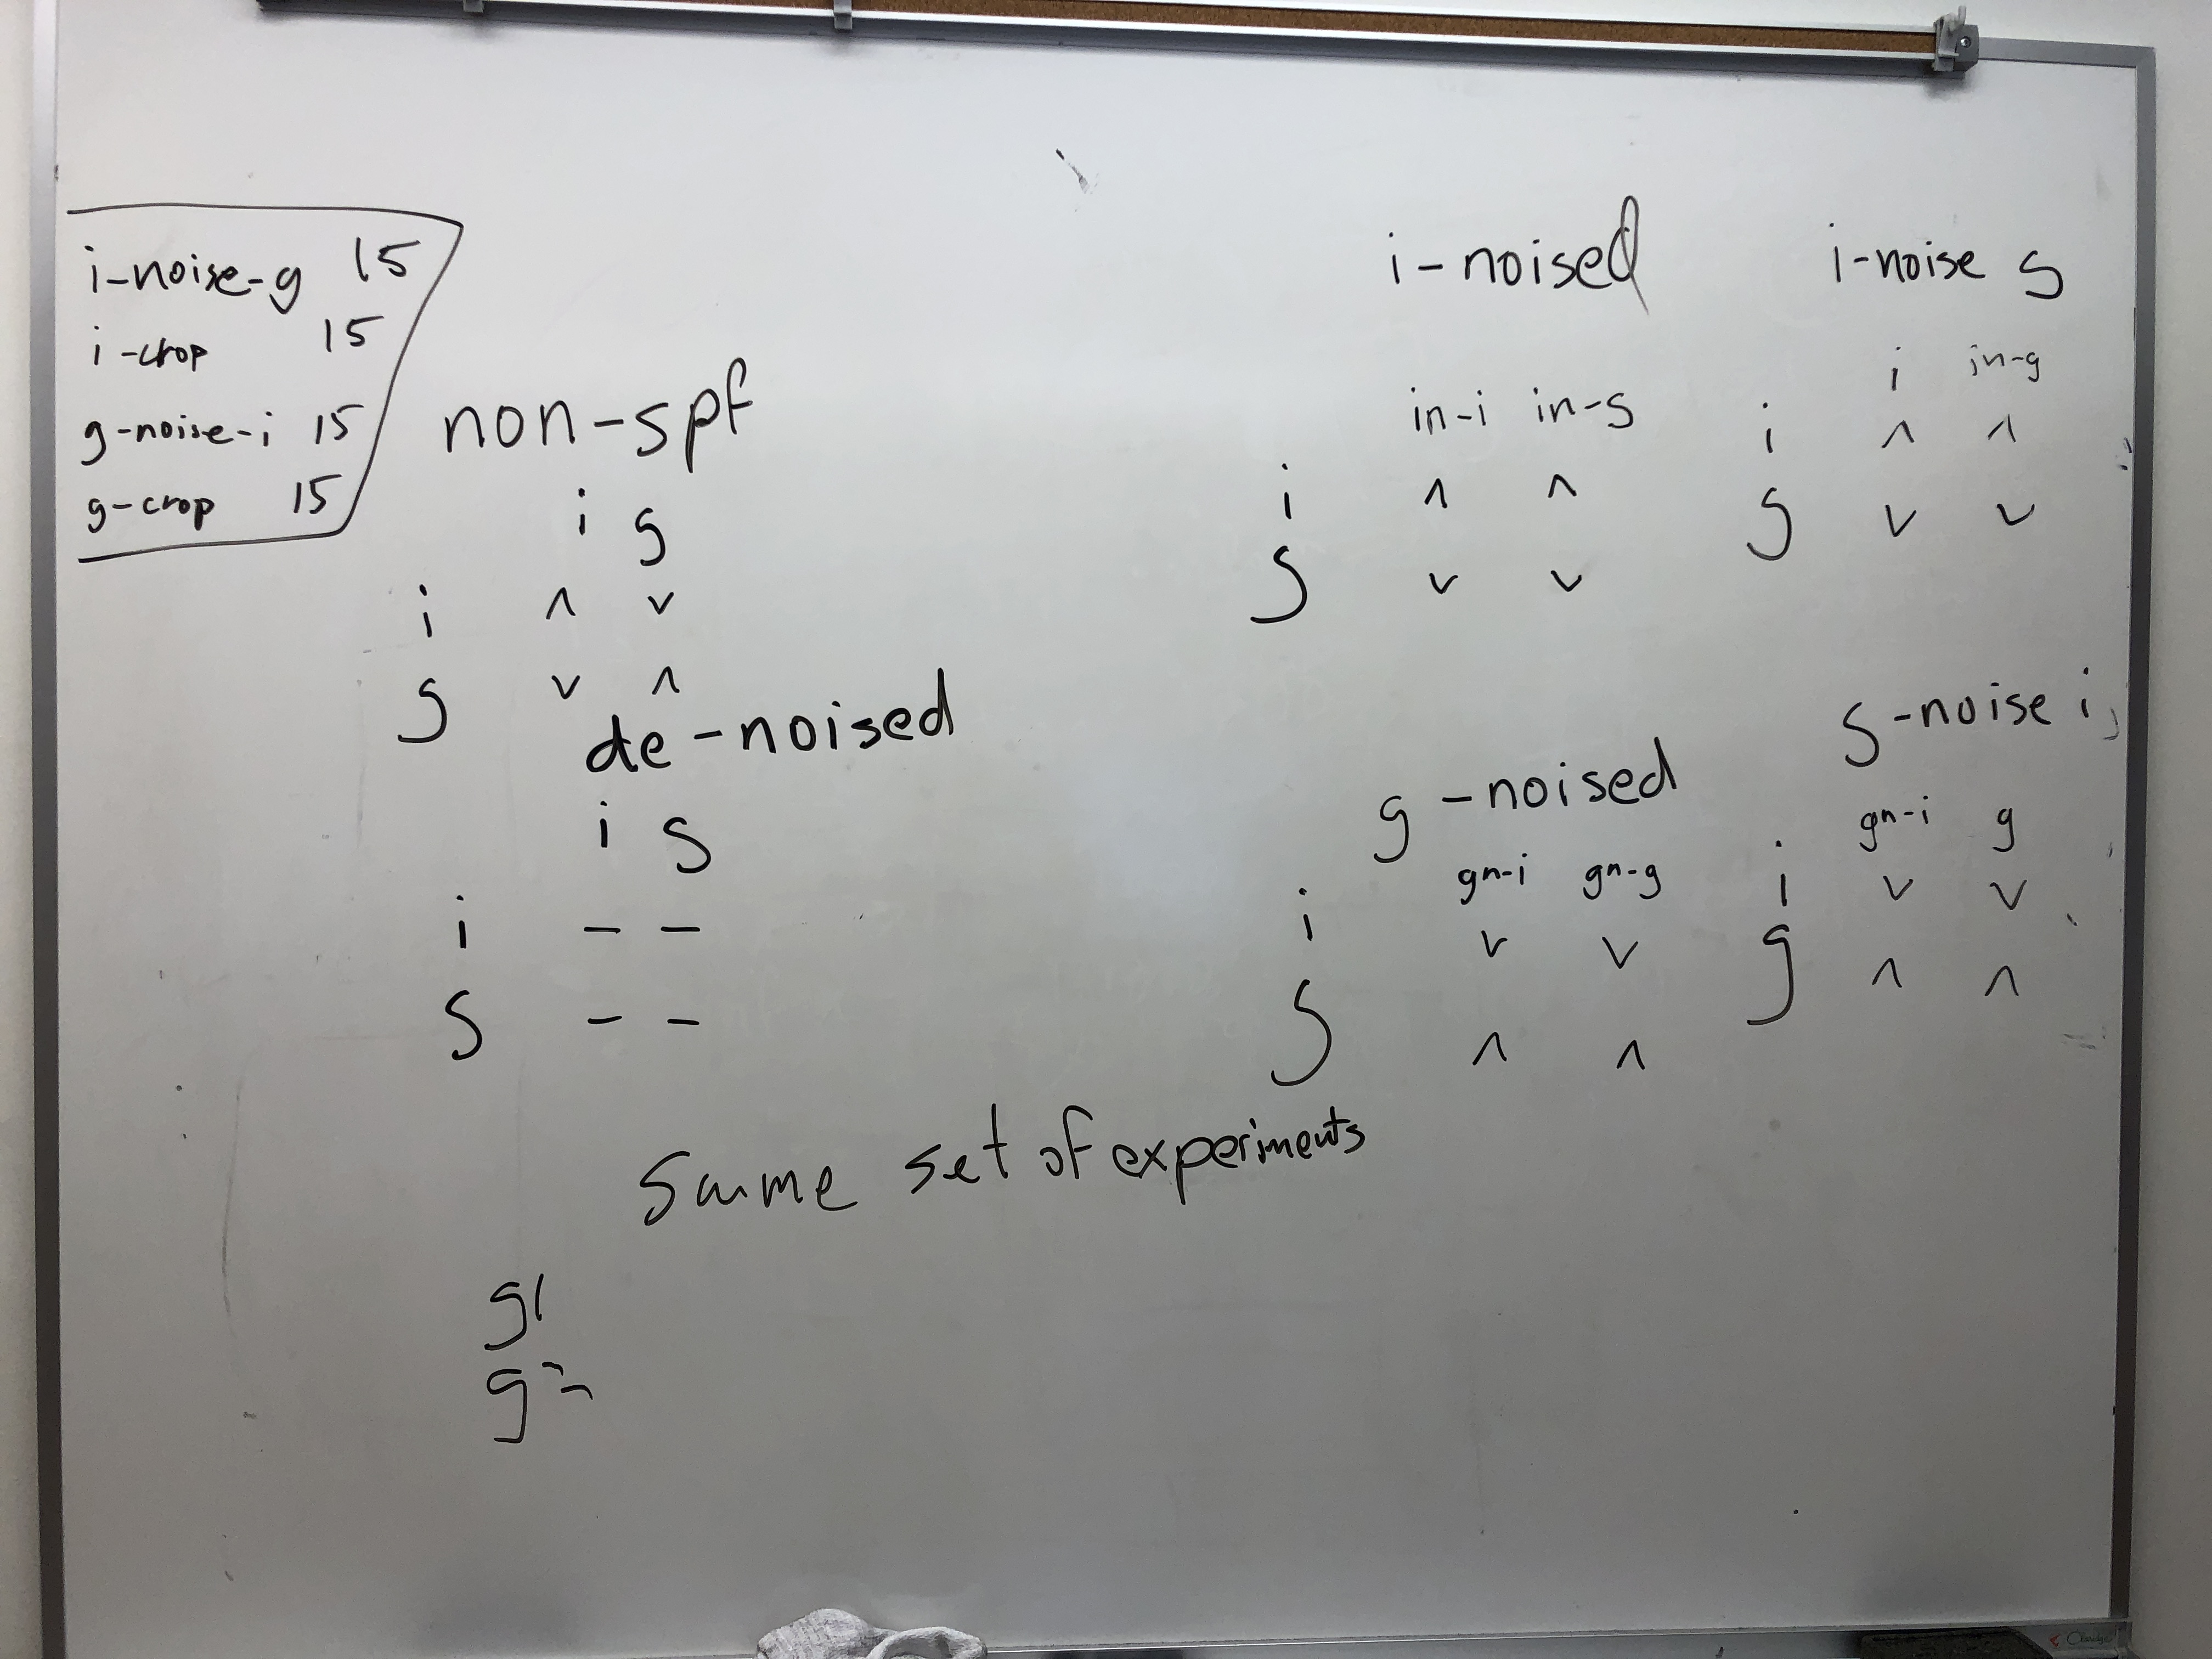 Picture of whiteboard with experiments